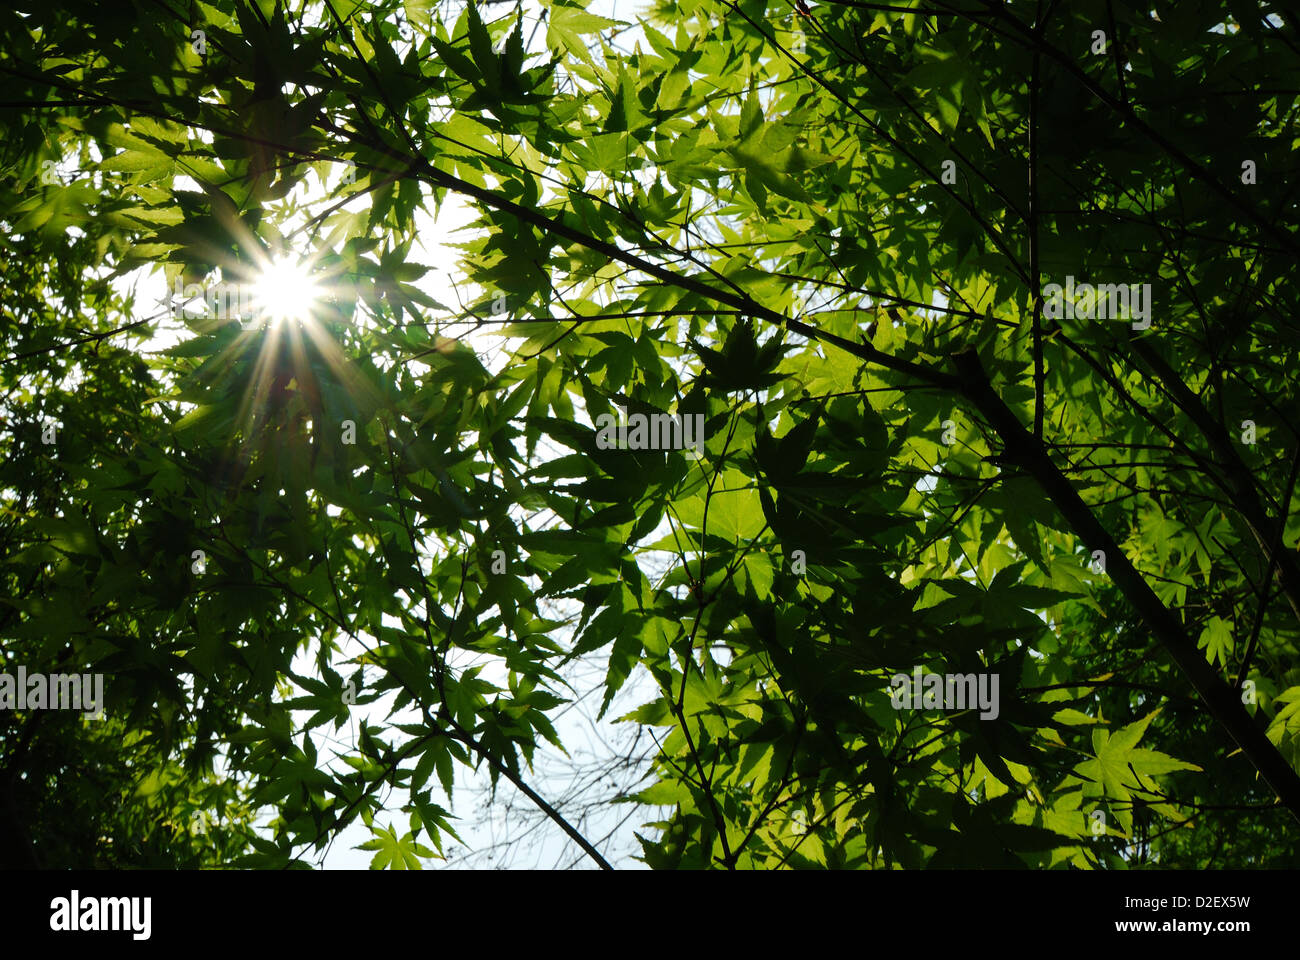 Green foliage of Acer Palmatum tree under the clear sunlight, Bingjiang Forest Park, Shanghai, China. Stock Photo